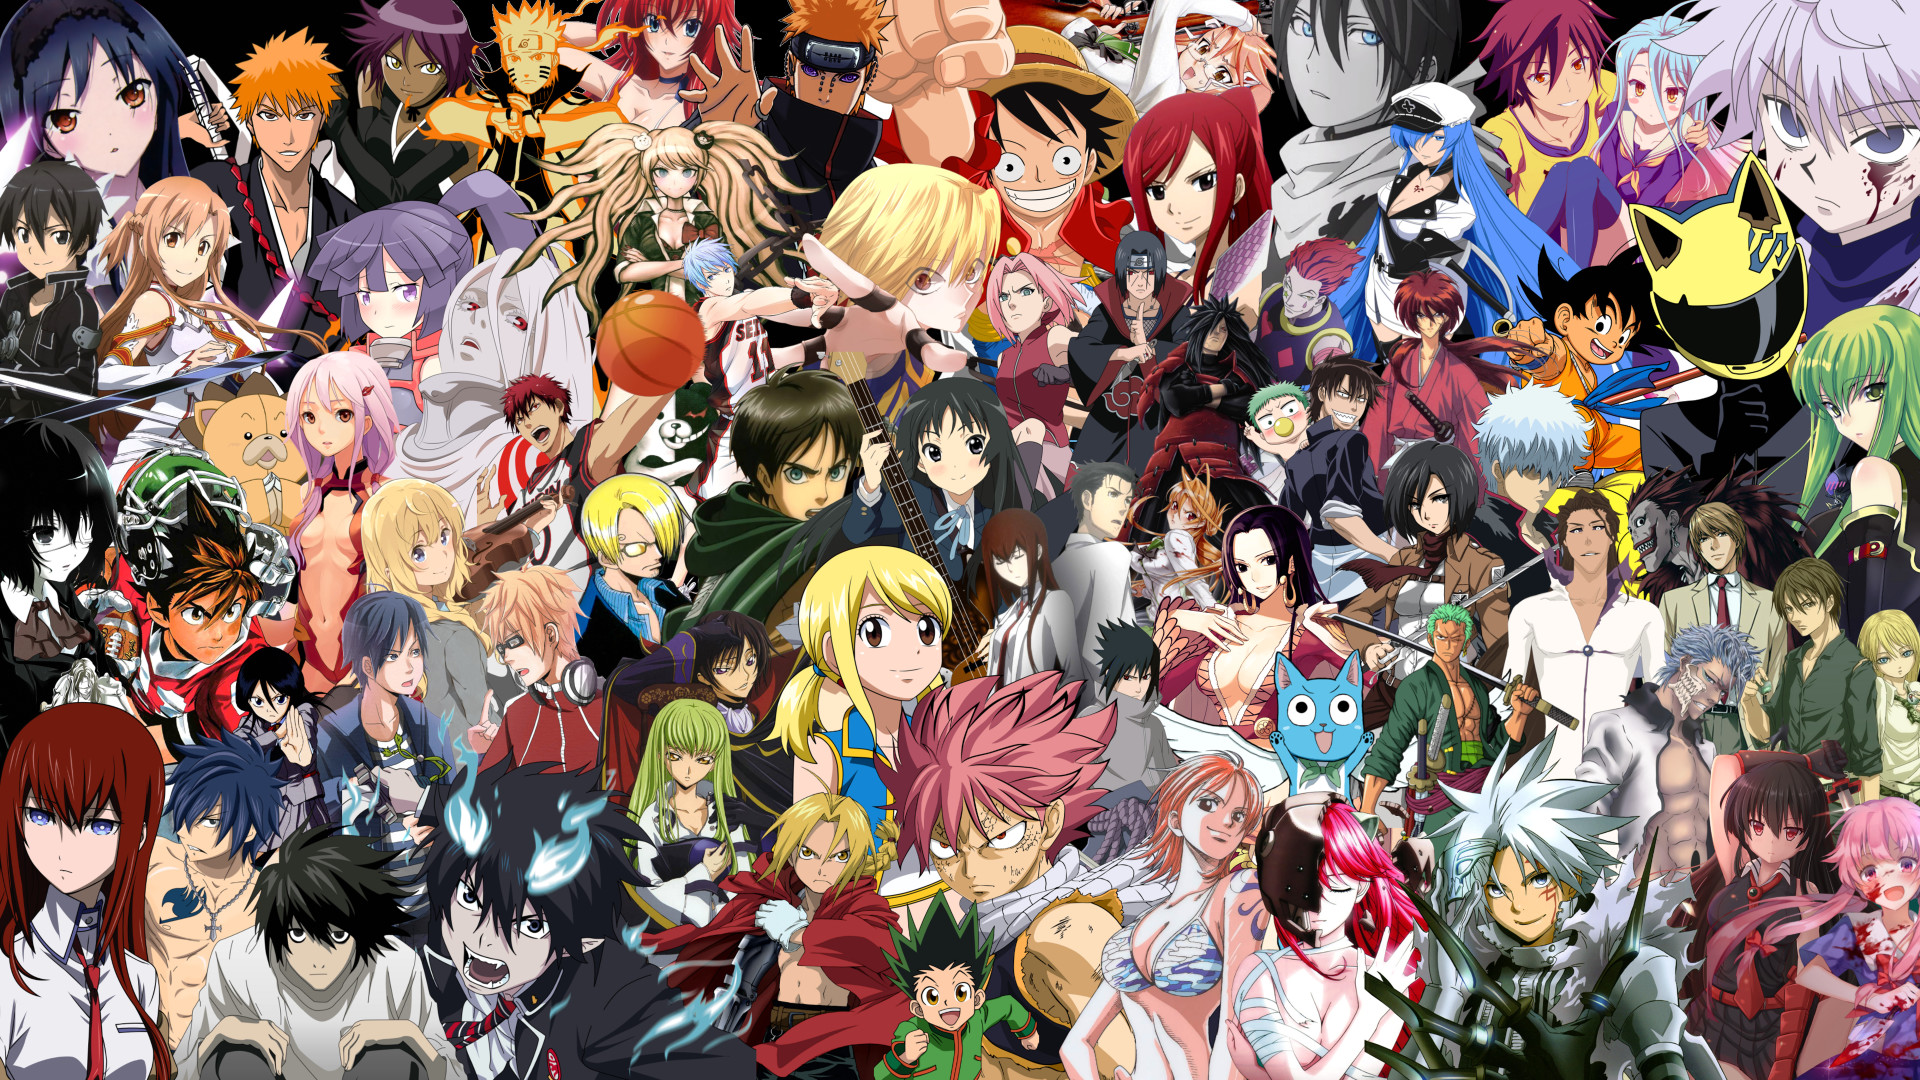 HD Wallpaper Background ID656029. 8000×4500 Anime Crossover